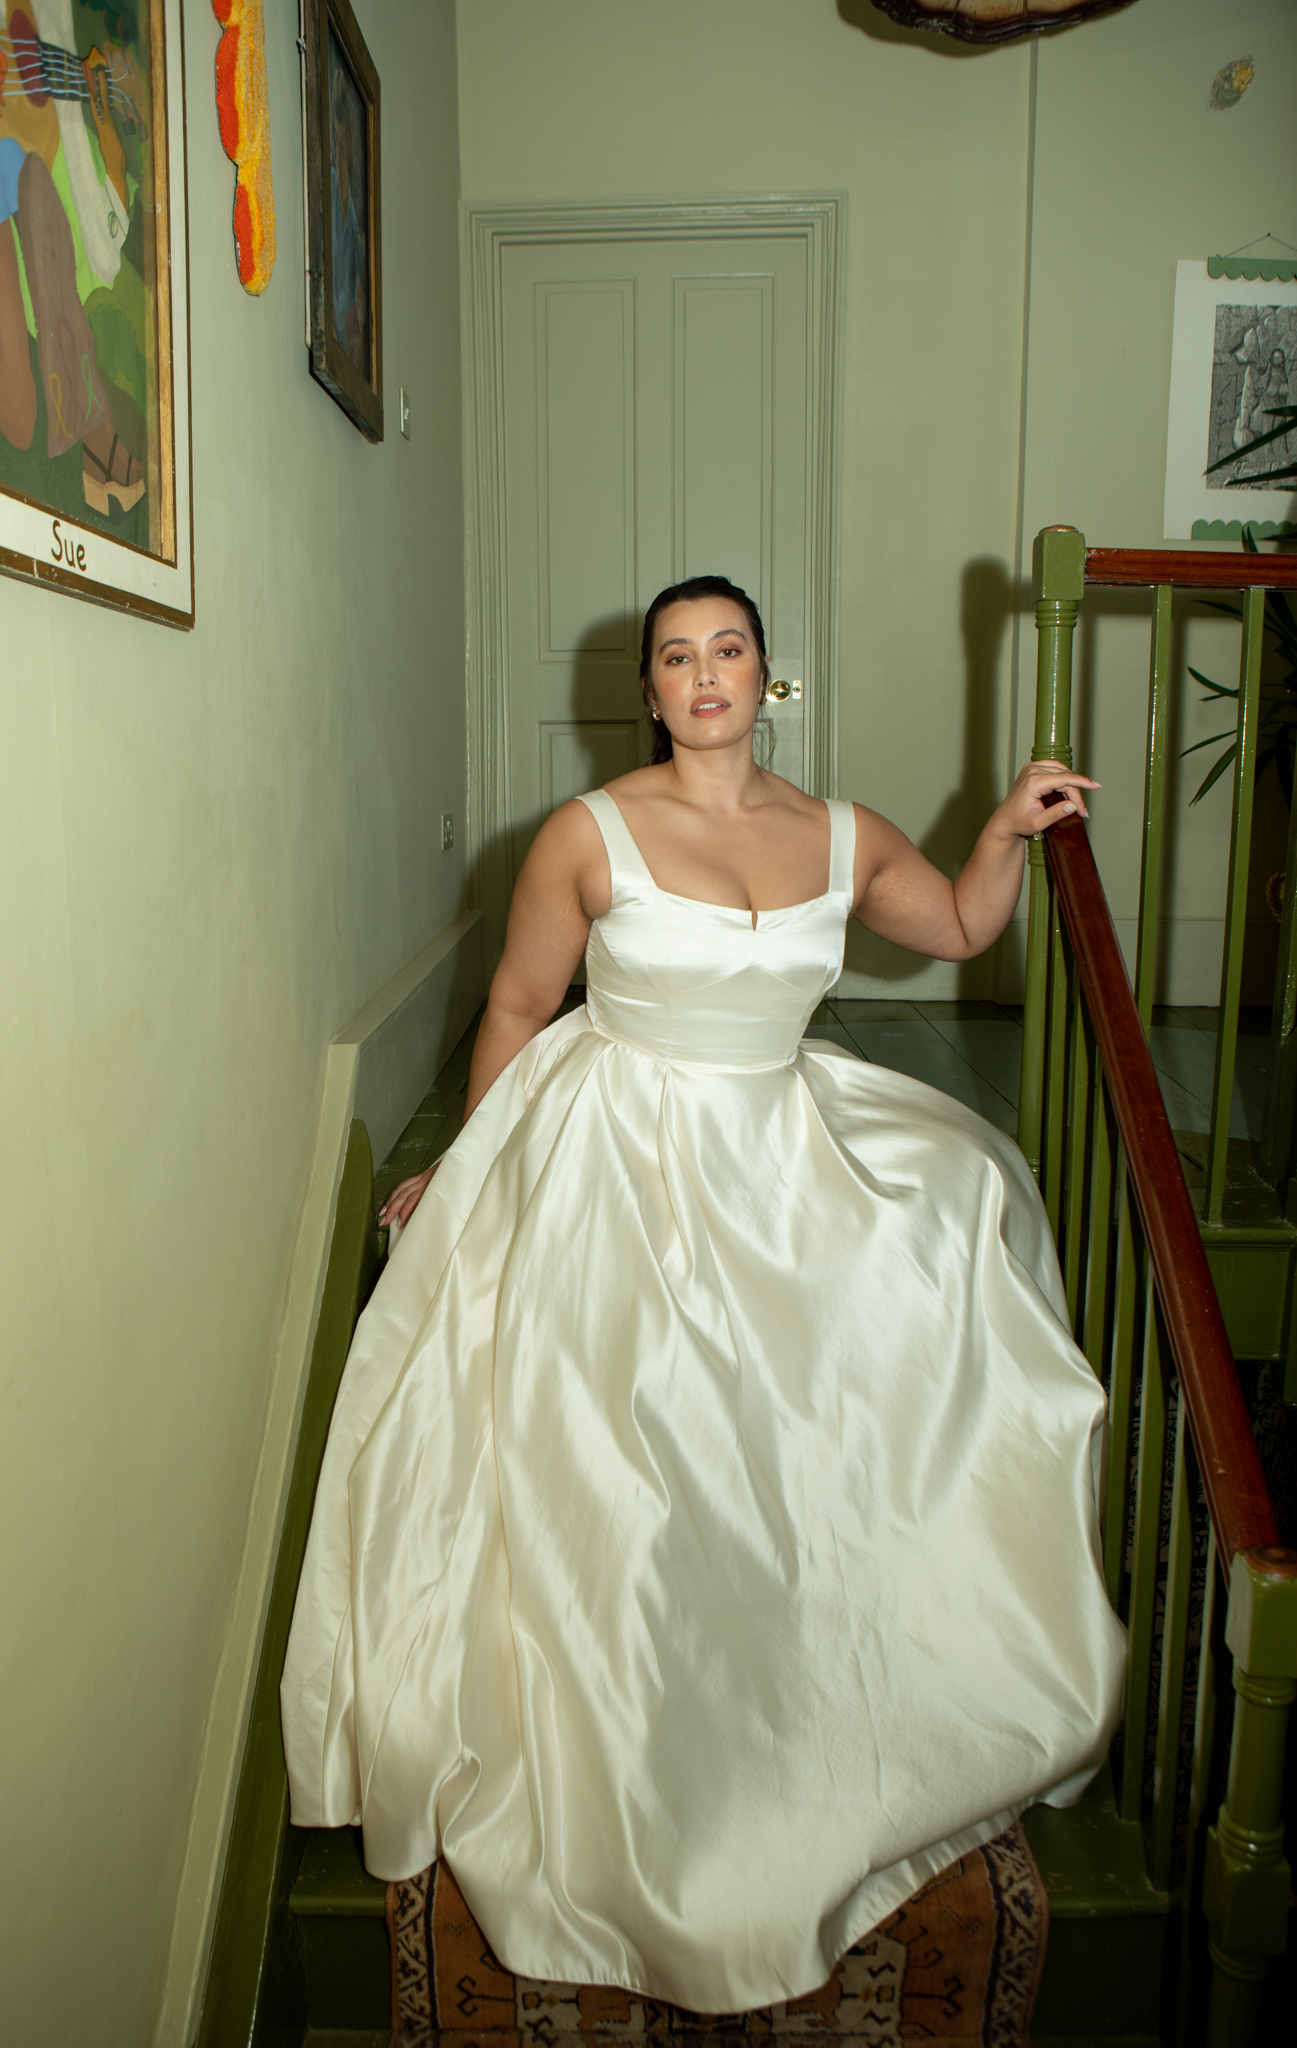 Plus size model wearing timeless wedding dress by Andrea Hawkes Bridal